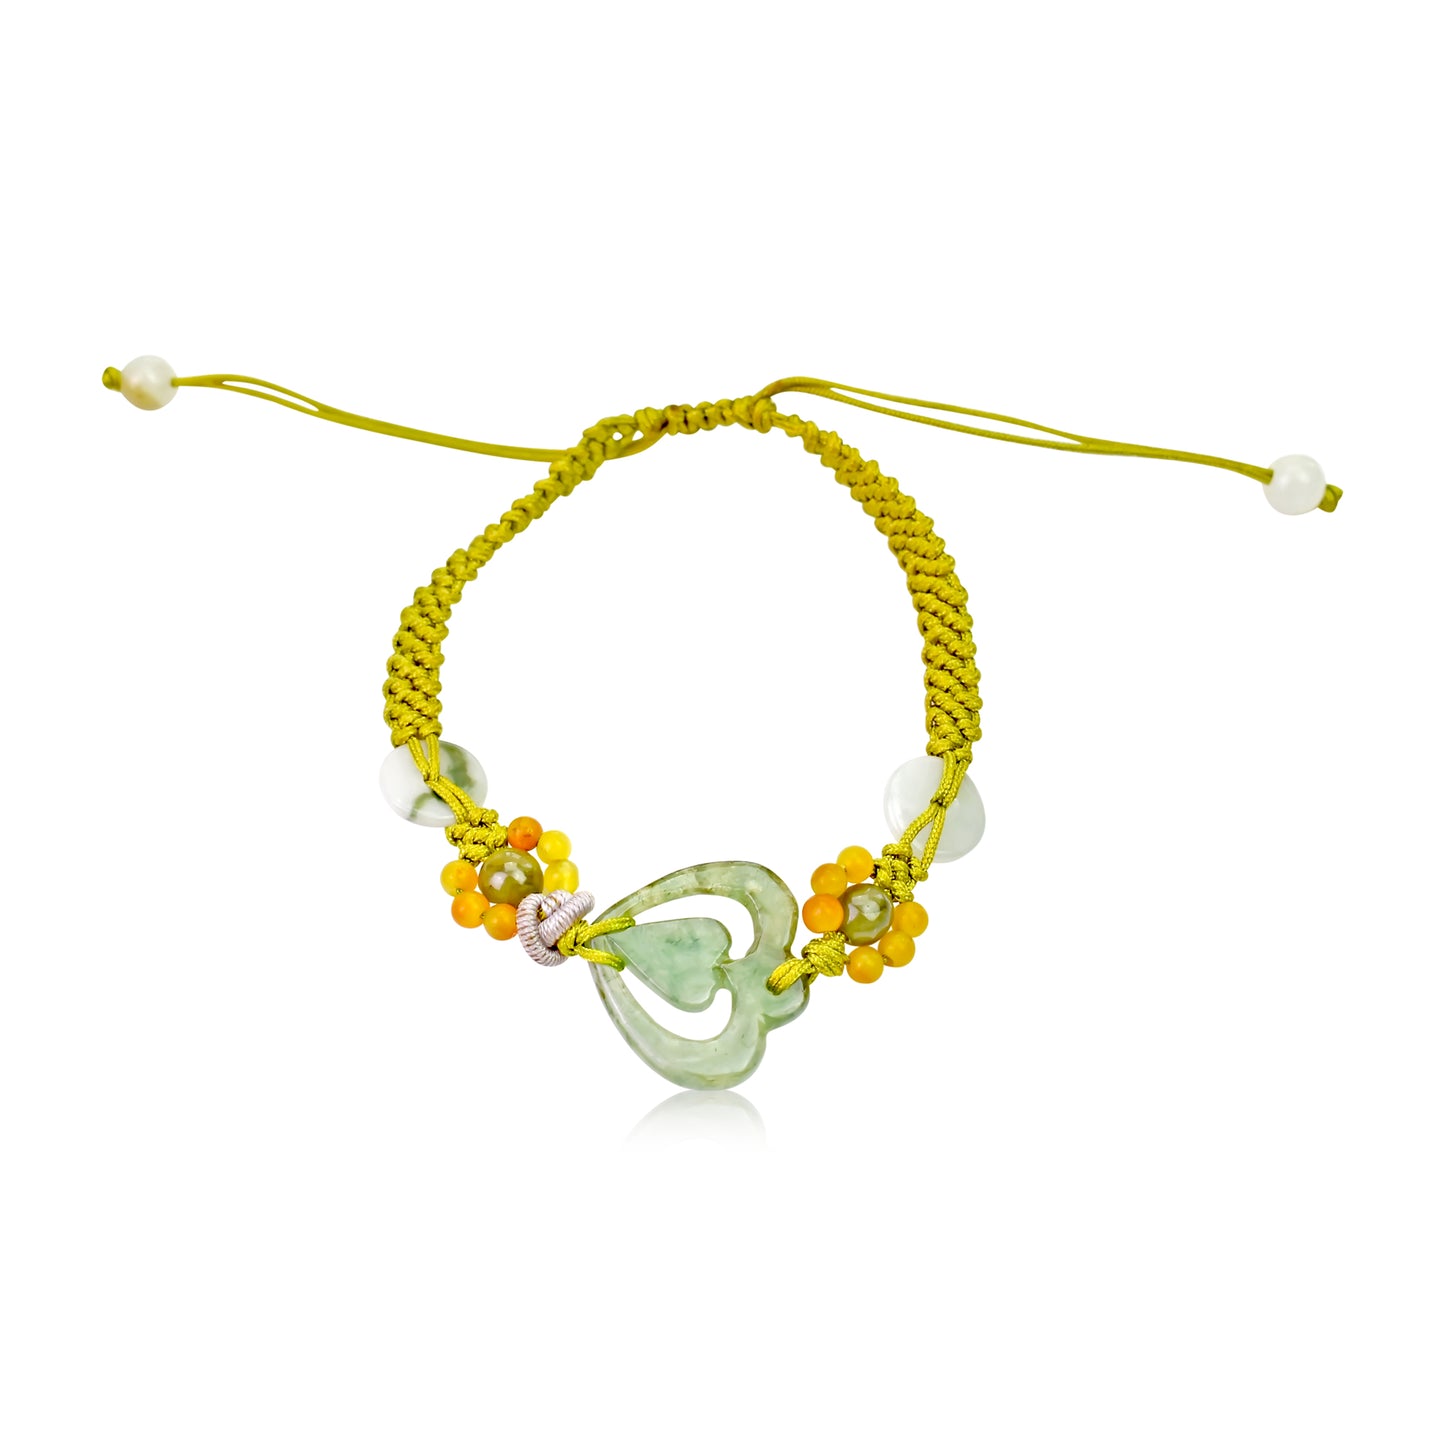 Love is in the Air with this Handmade Heart Jade Bracelet made with Lime Cord